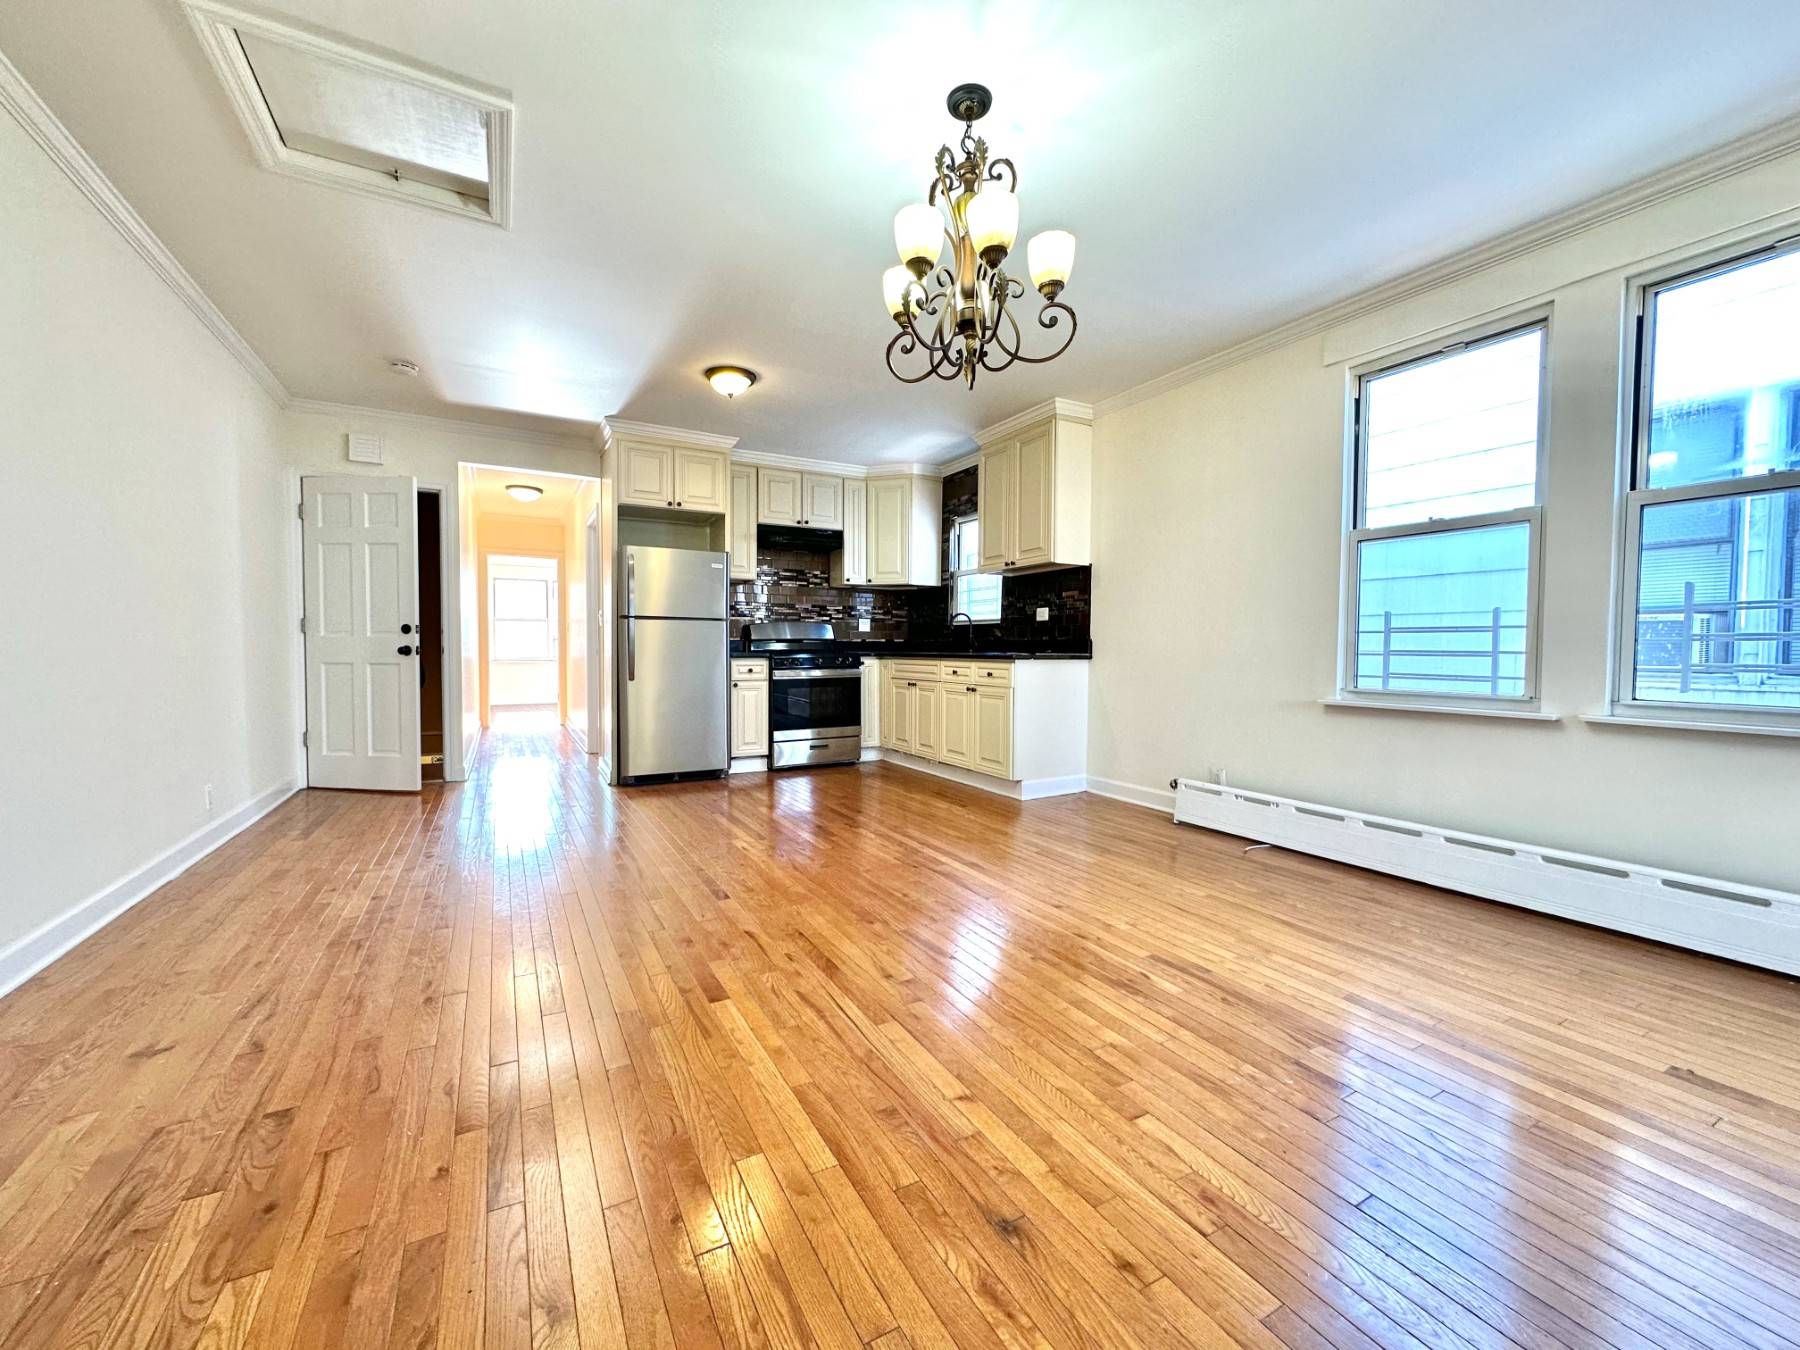 Recently renovated Sunny 3 Bedroom 1 Bathroom apartment available in a two family house located in Maspeth bordering Woodside.